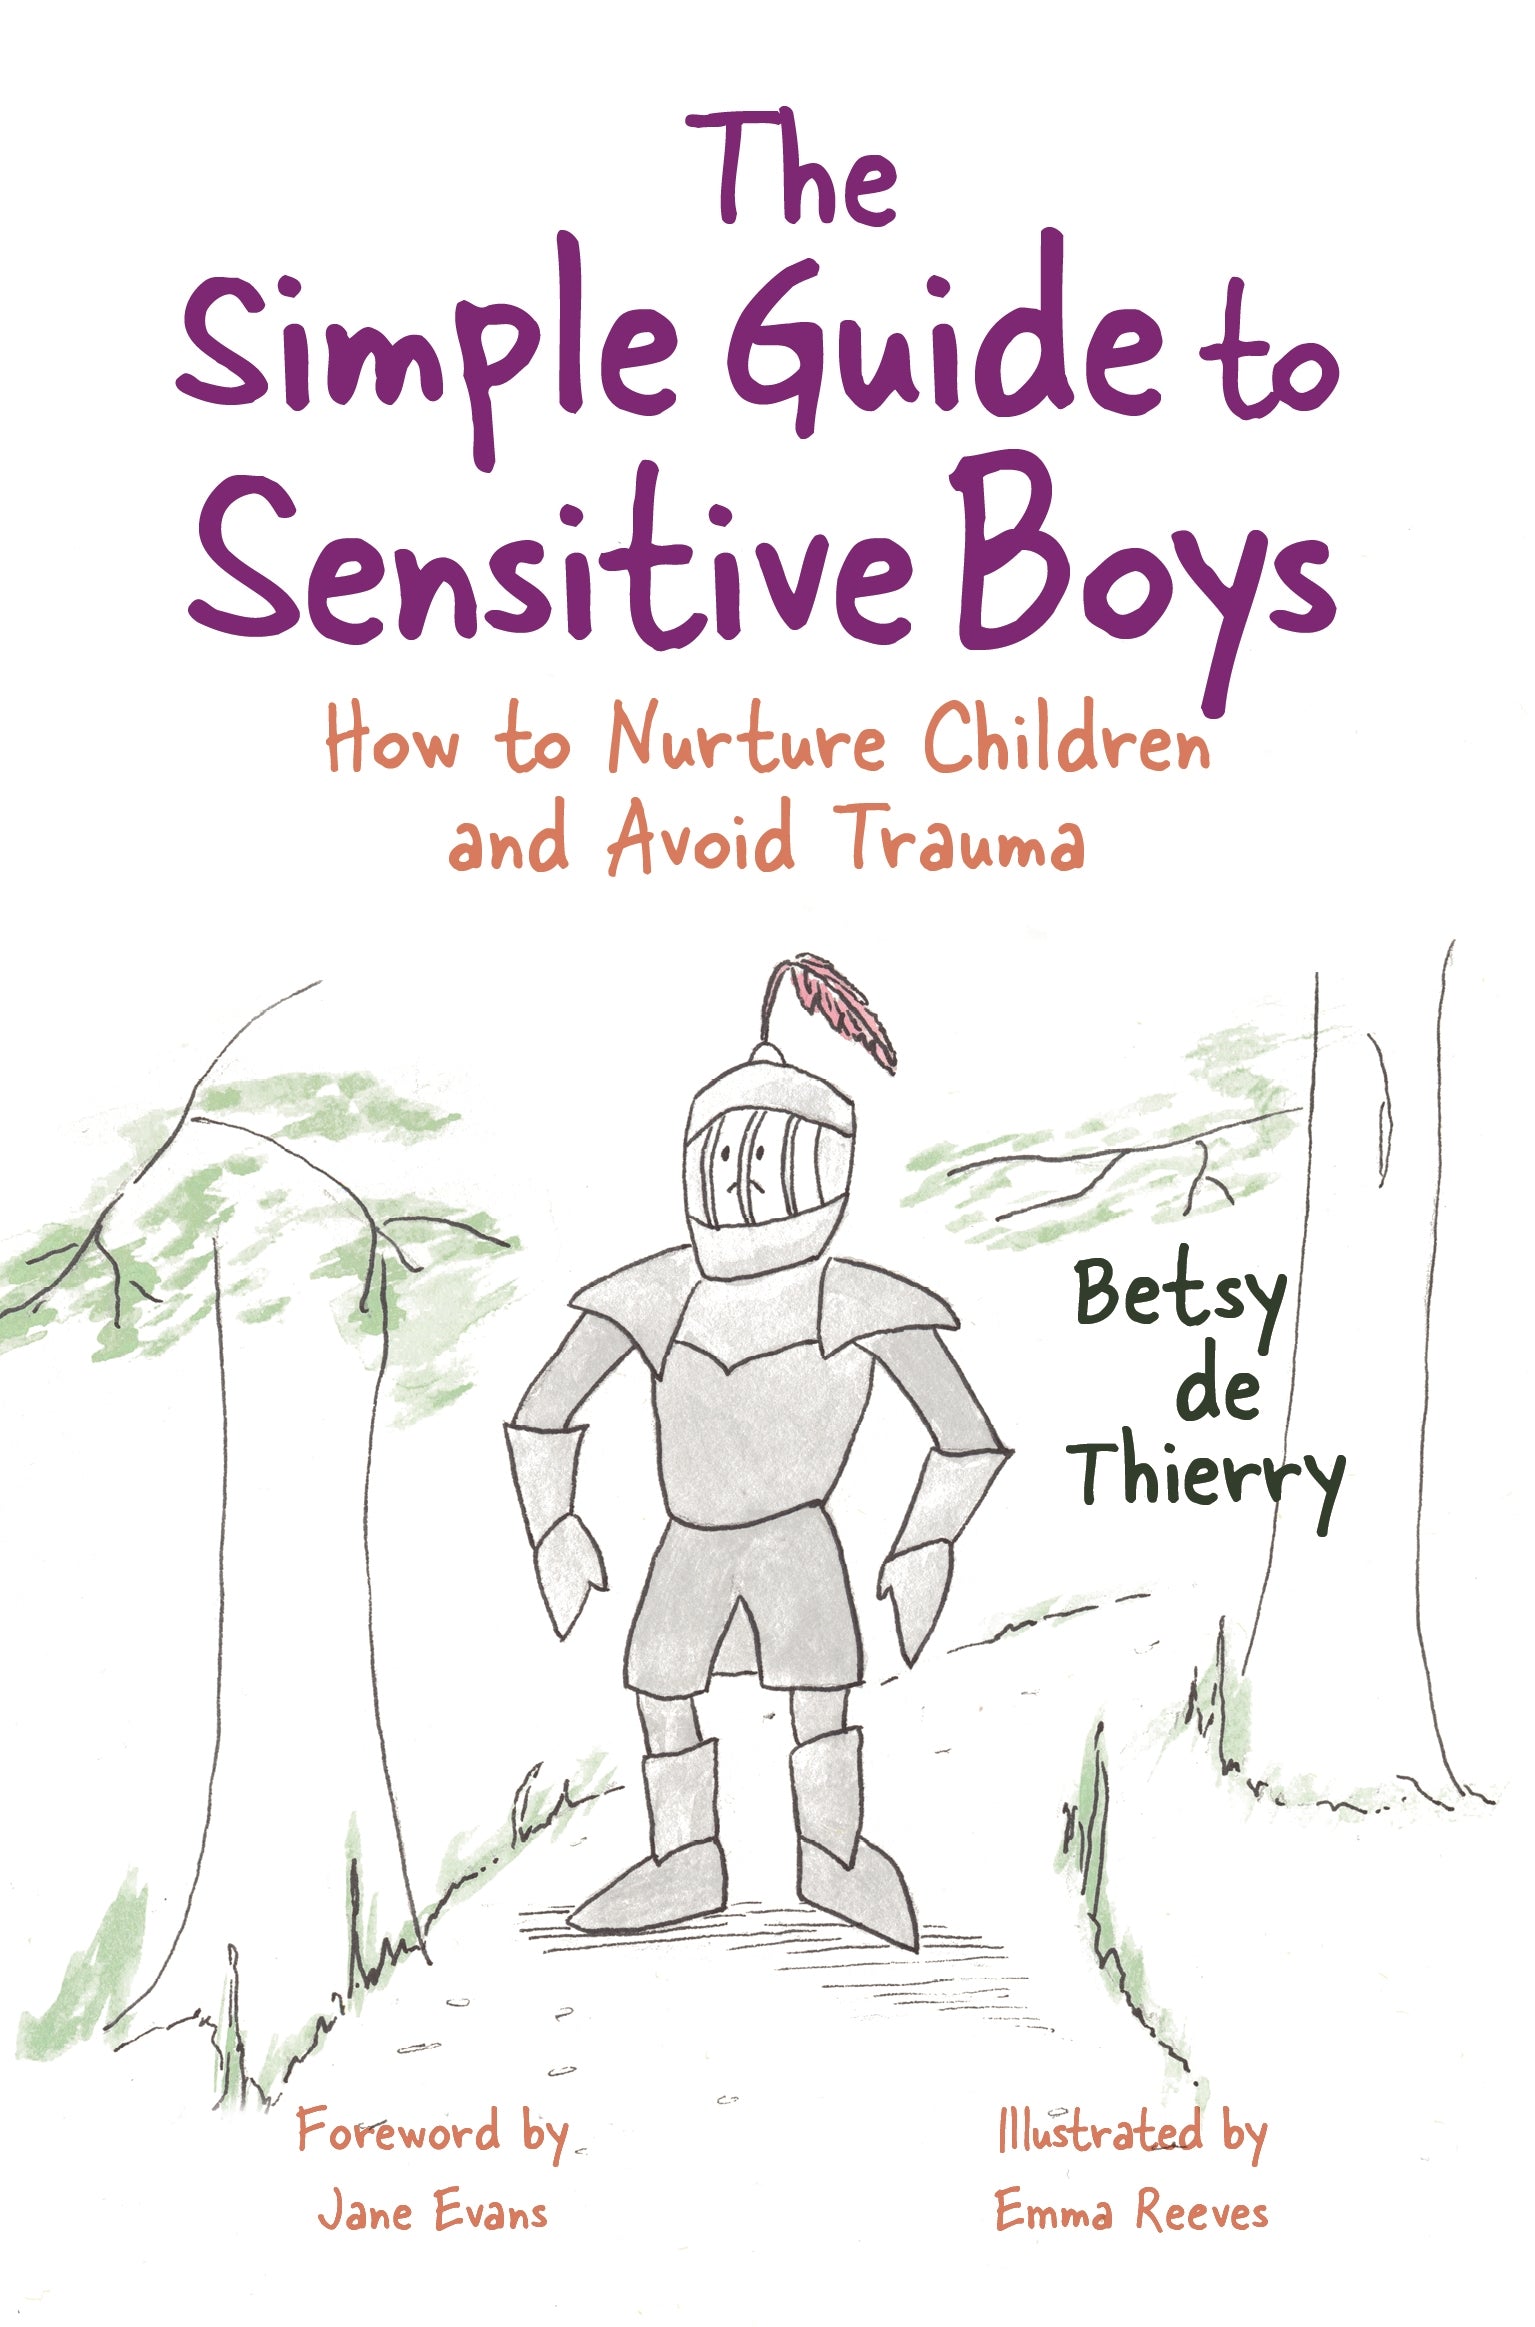 The Simple Guide to Sensitive Boys by Betsy de Thierry, Emma Reeves, Jane Evans